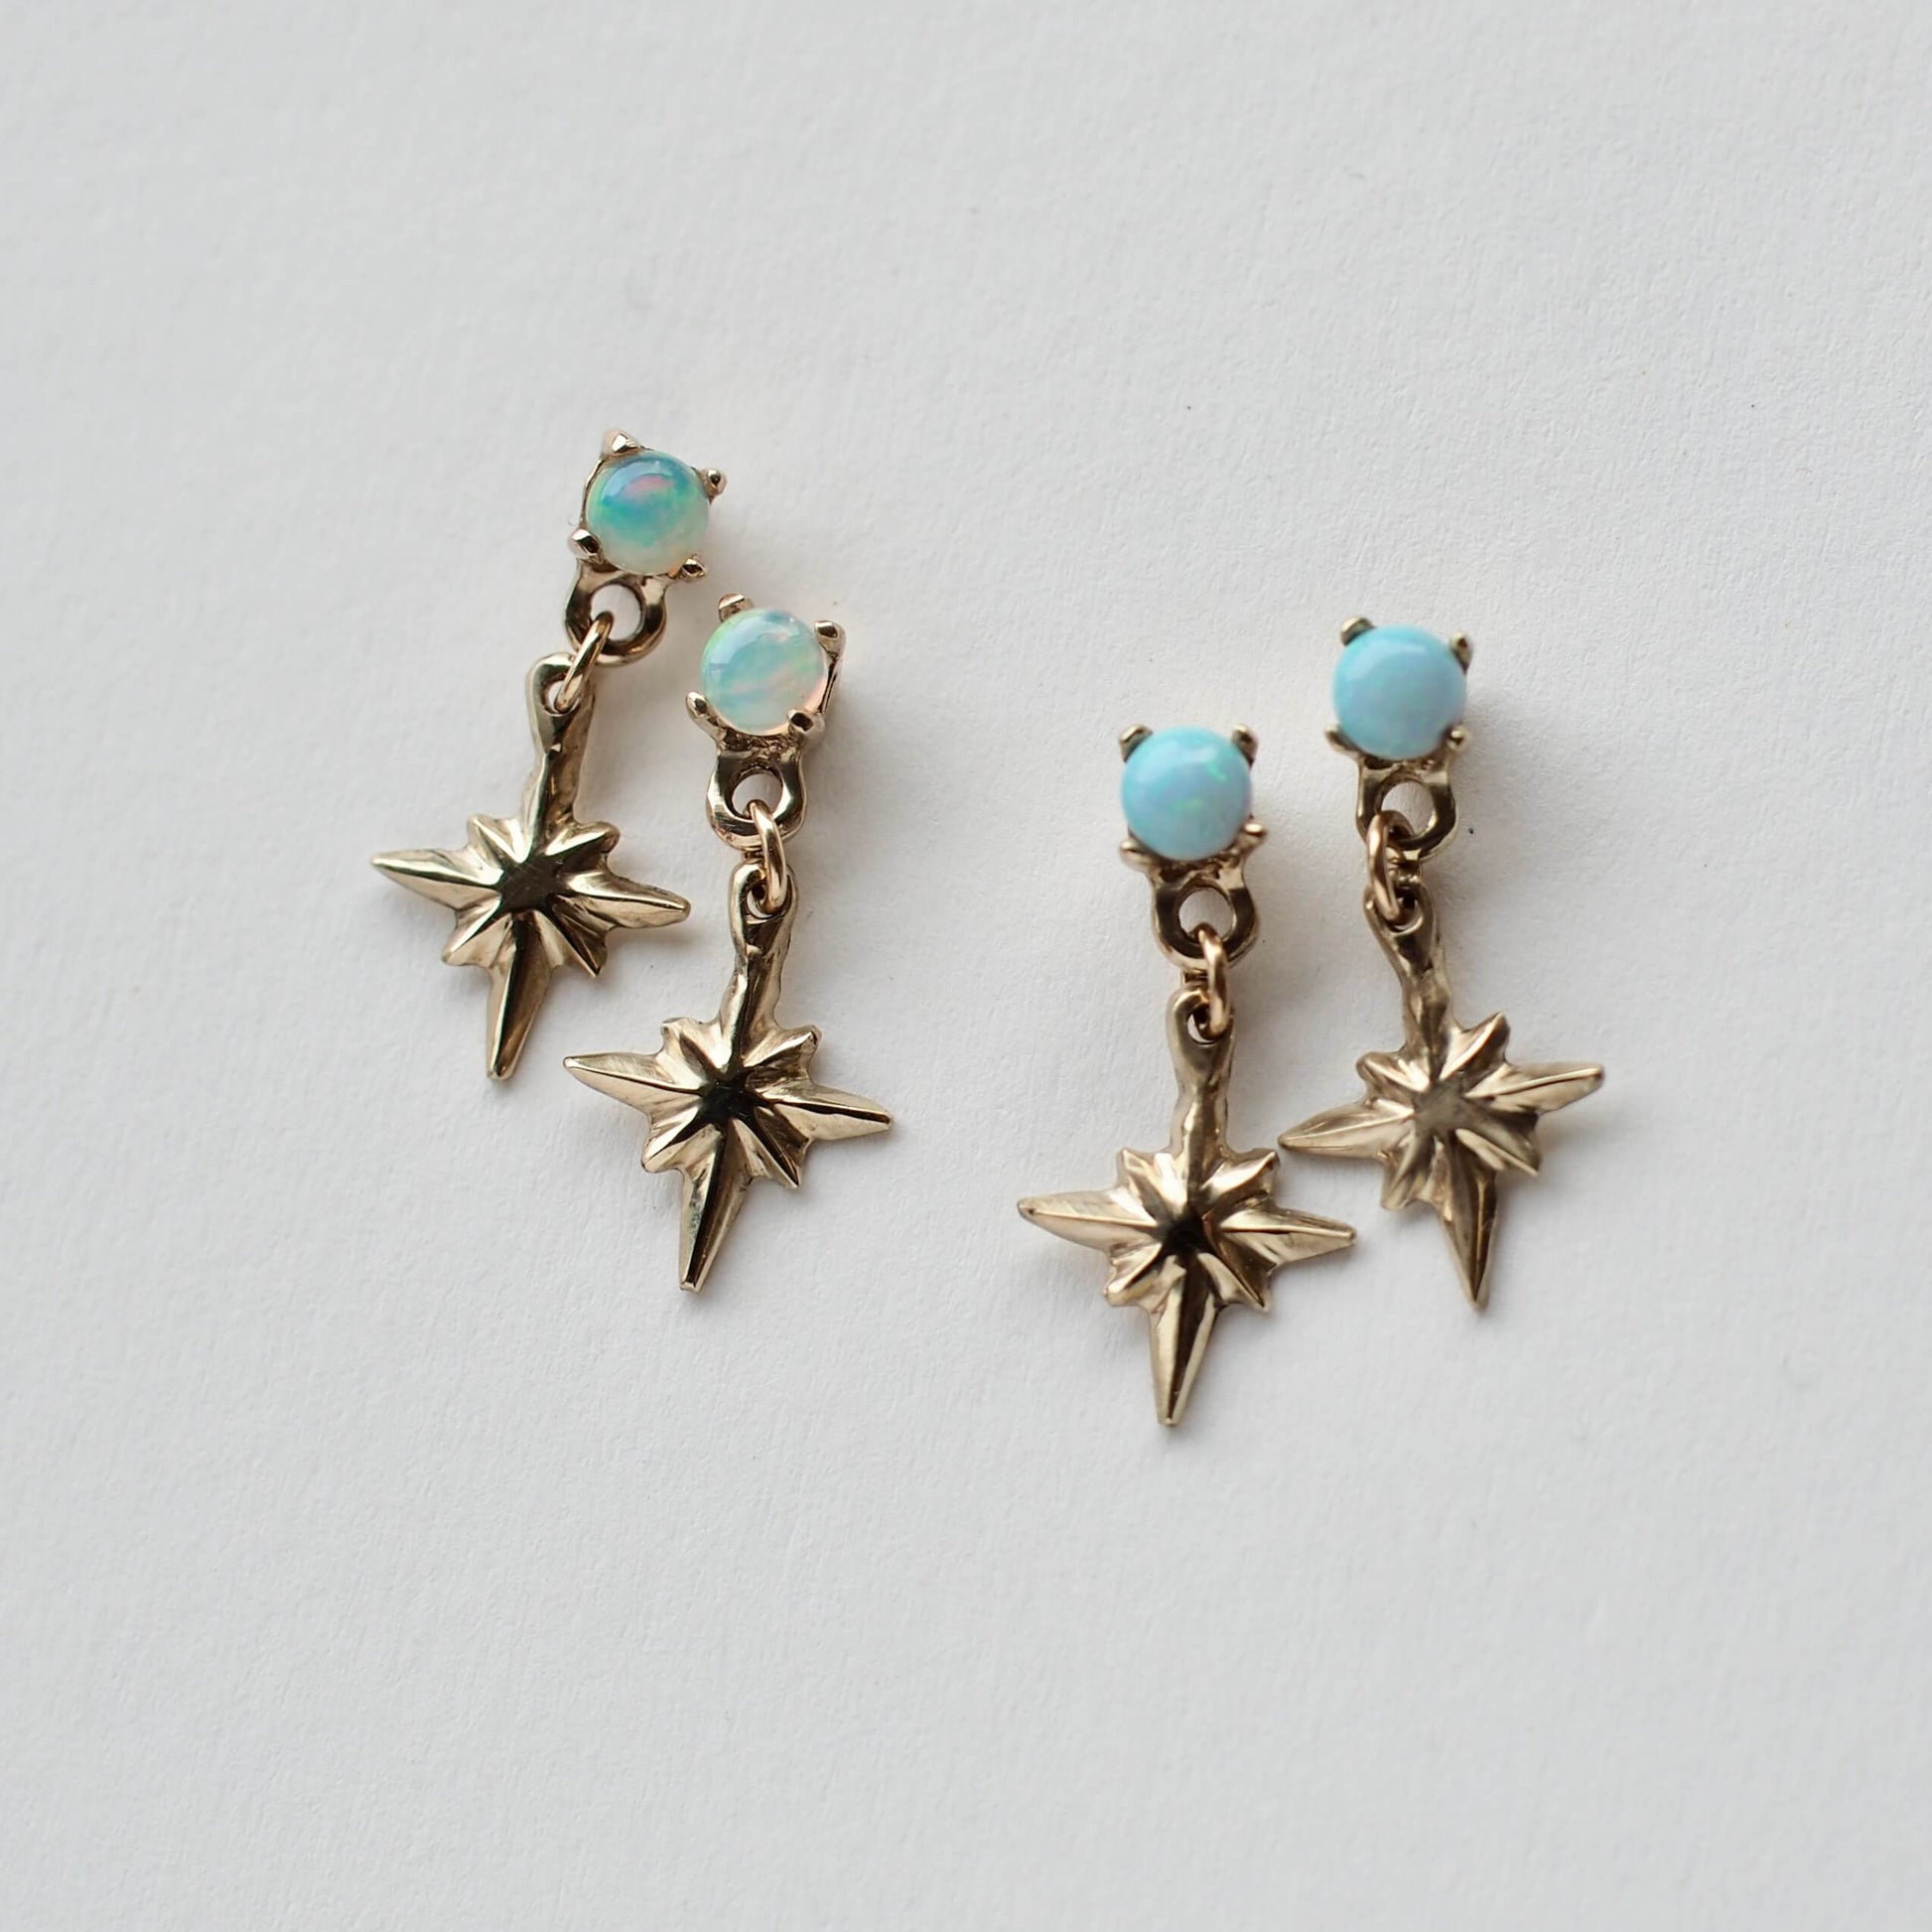  Tiny star dangle earrings in gold tone bronze and sterling silver, set with natural and synthetic opals